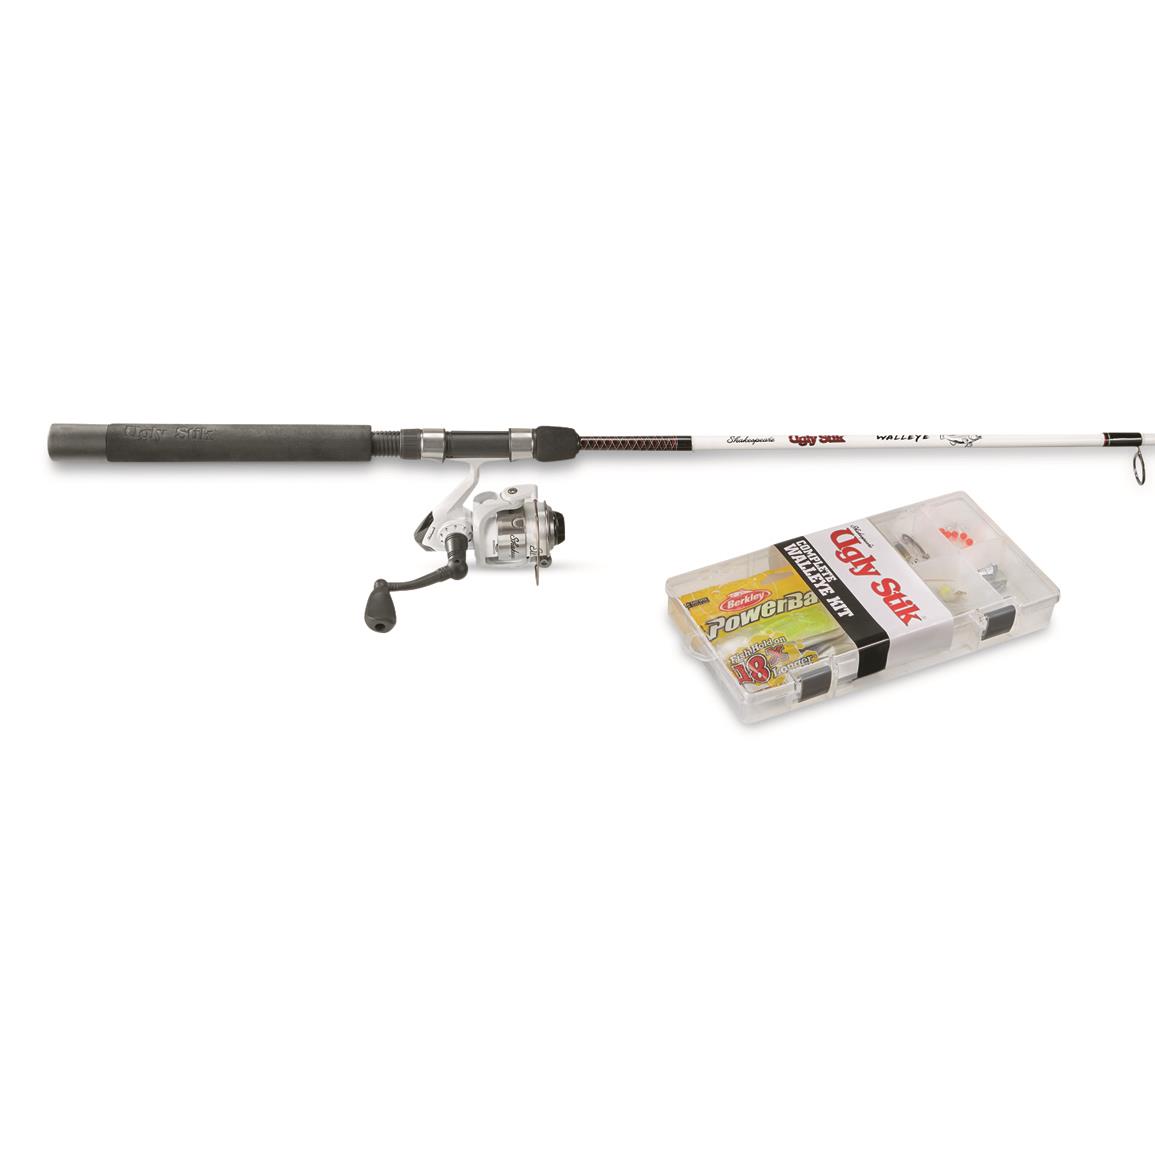 Ugly Stik Catch Ugly Fish Spinning Reel and Fishing Rod Combo Kit